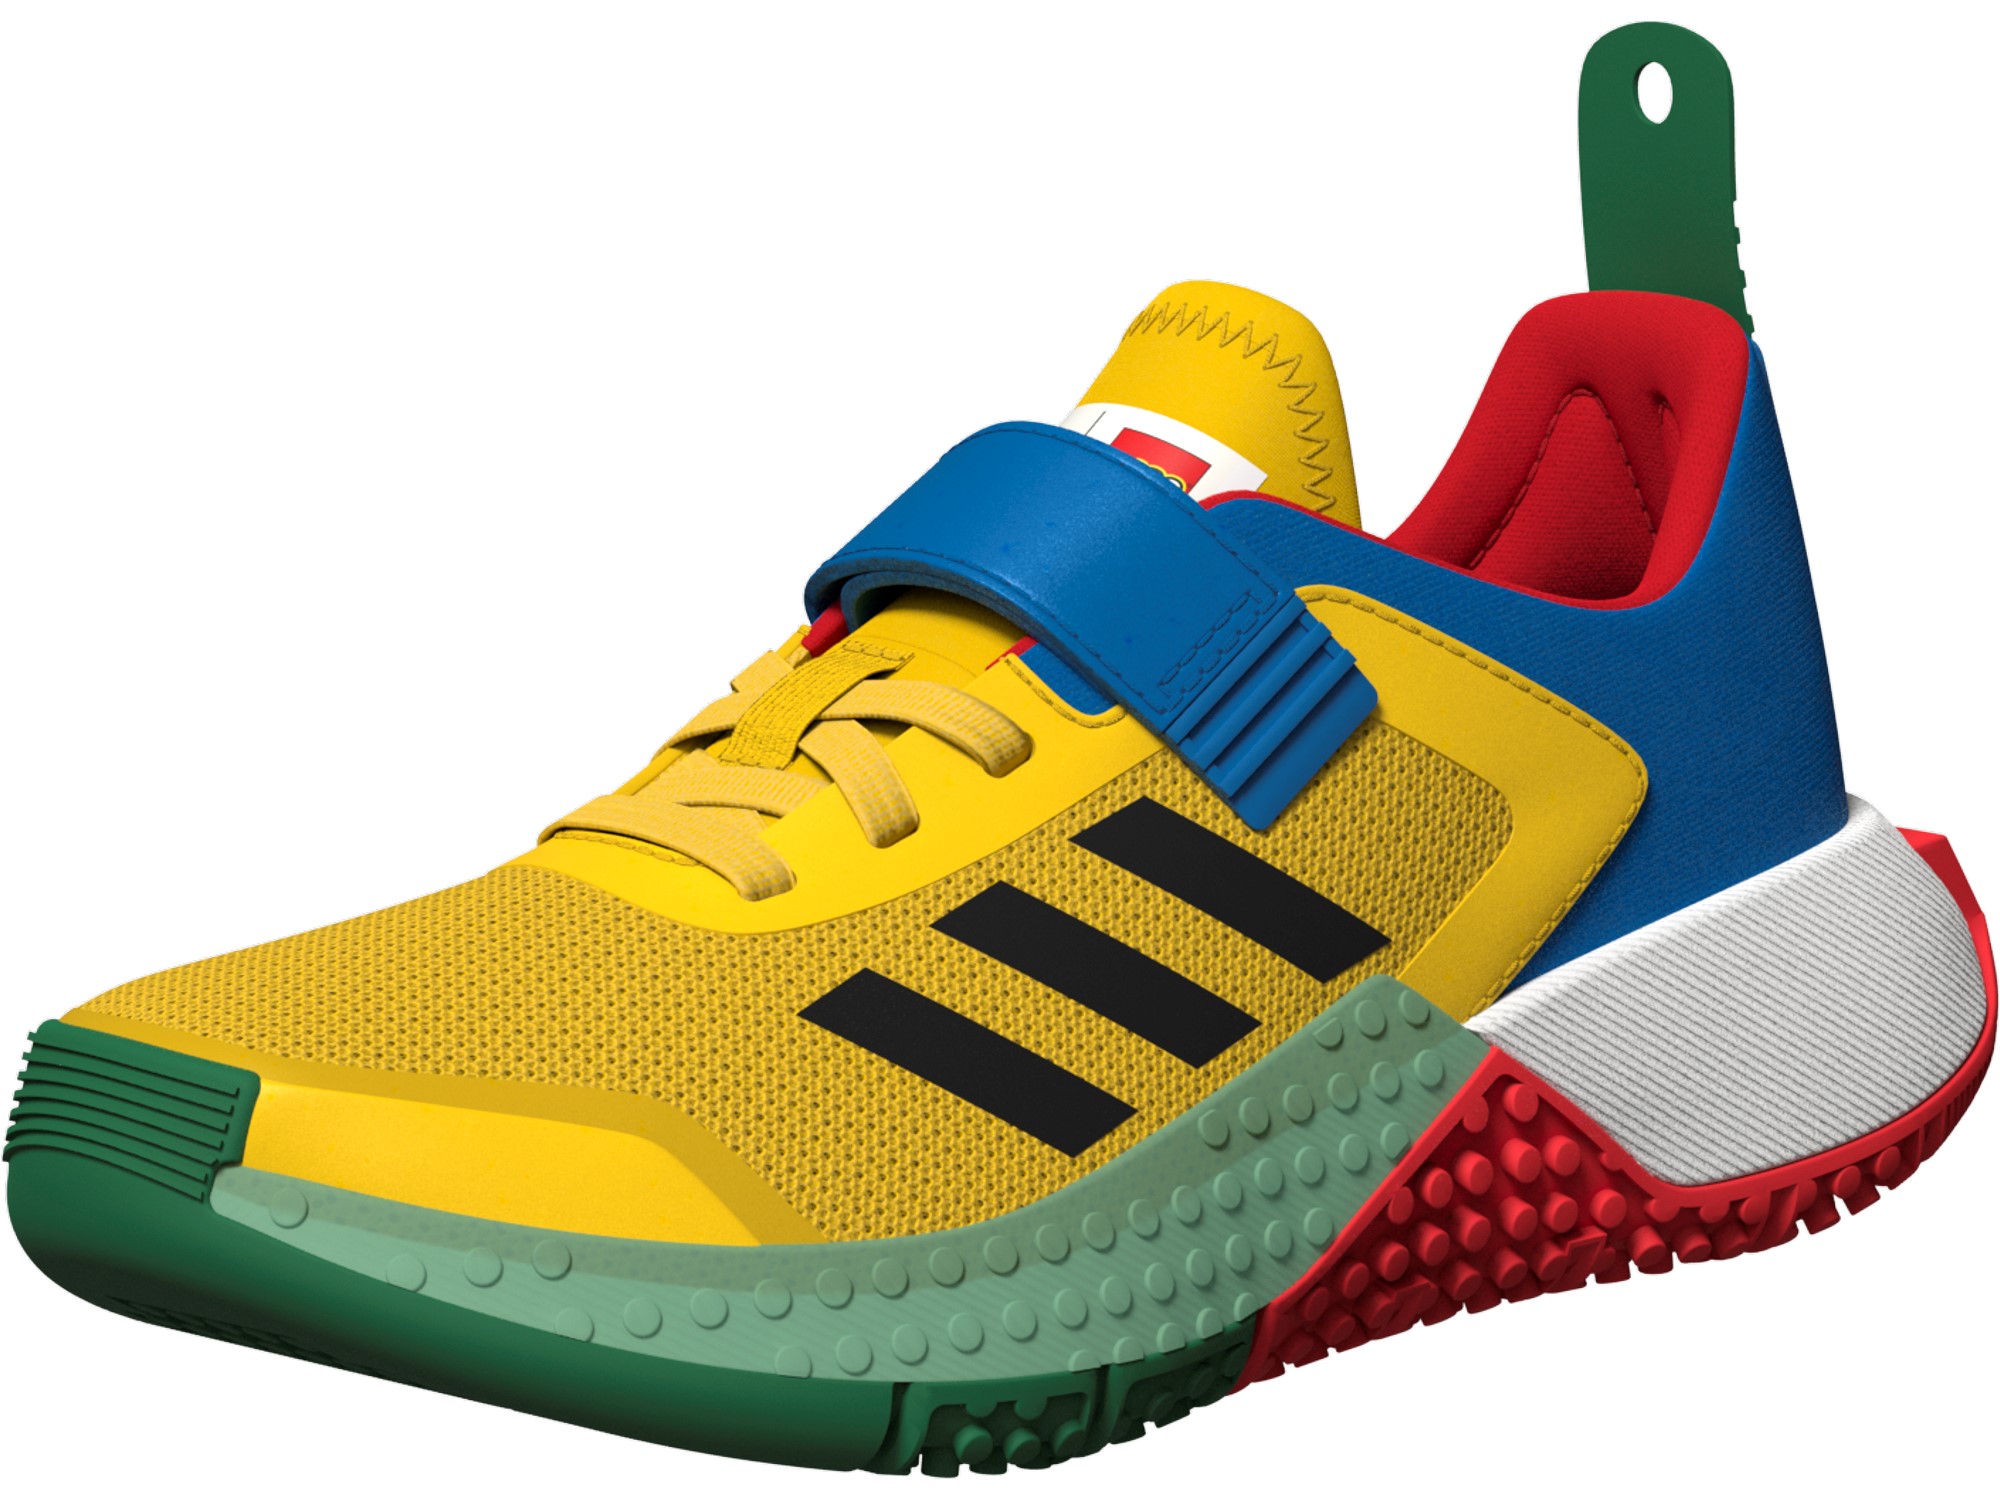 Buy > adidas x lego sport shoes yellow > in stock